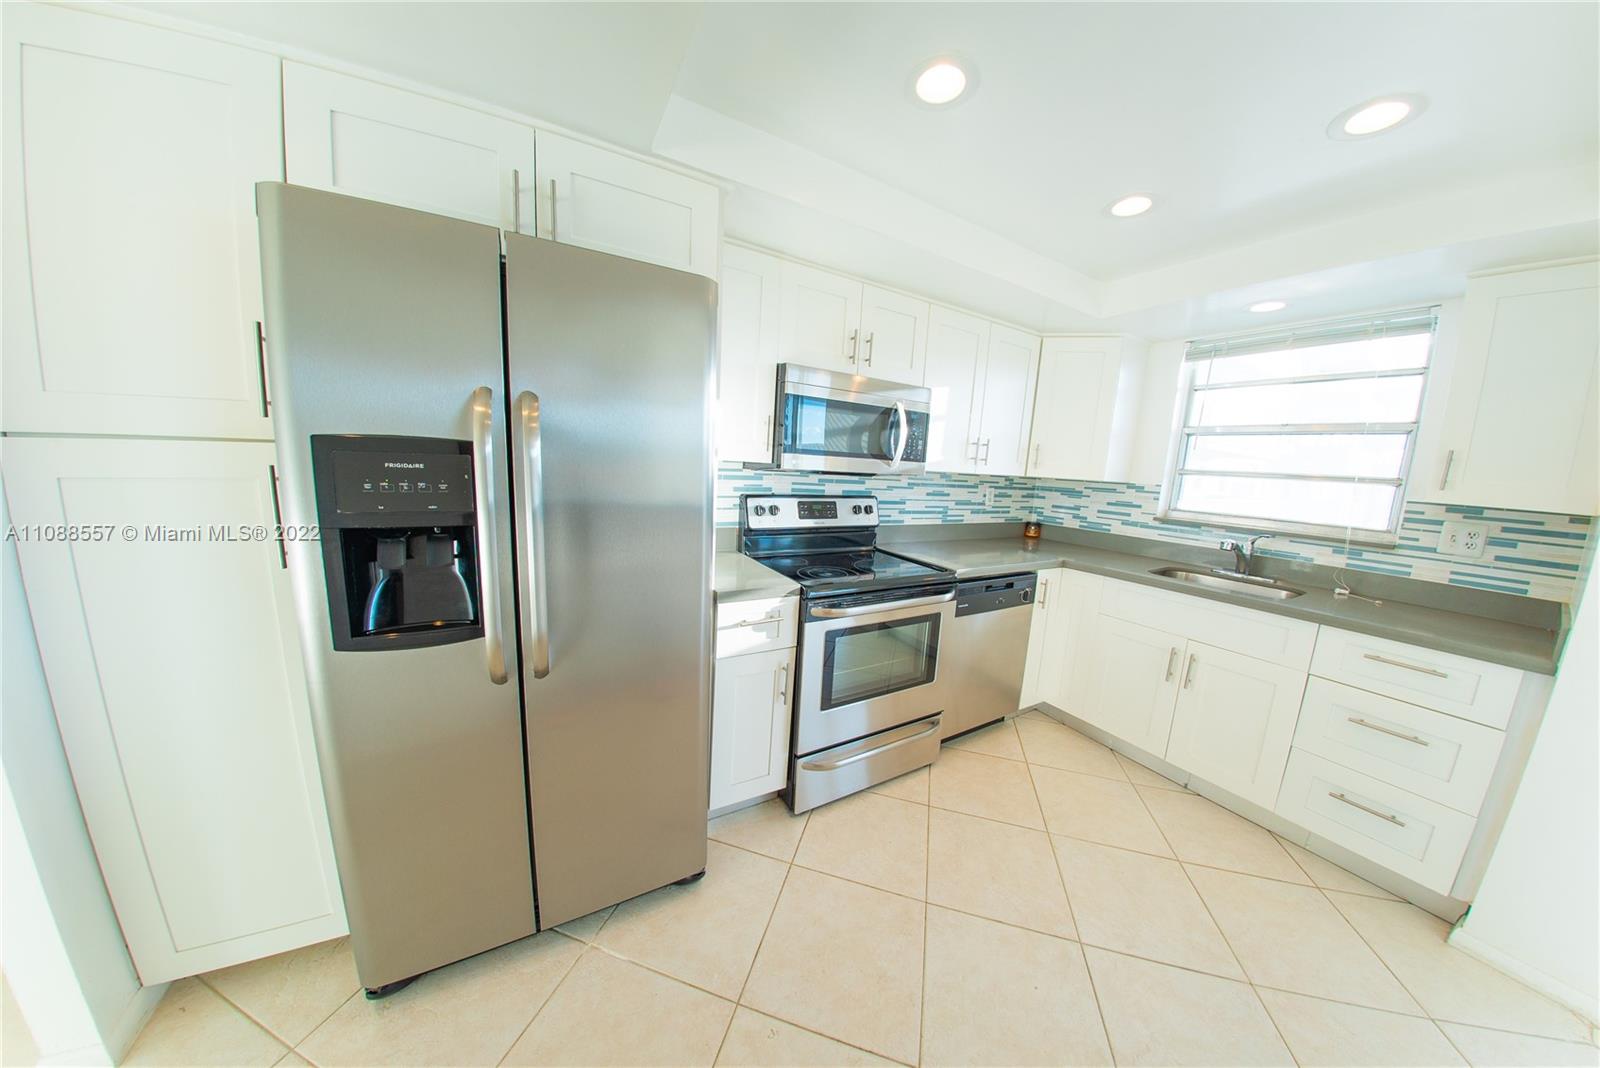 a kitchen with white cabinets stainless steel appliances and a window